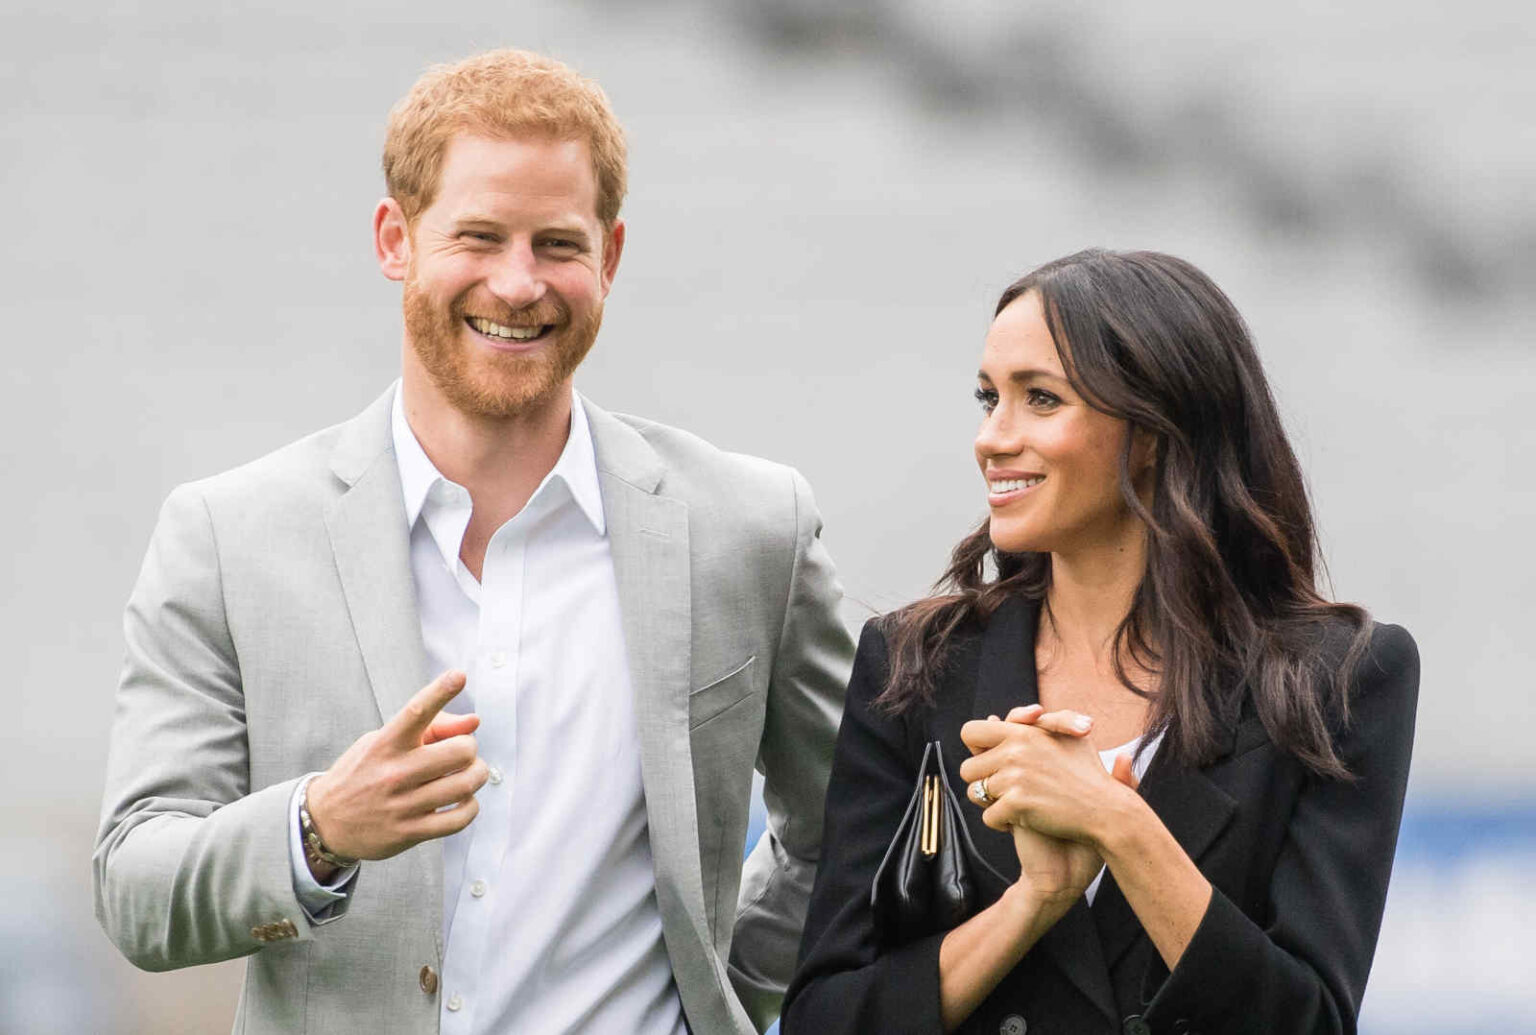 Like phoenixes rising from the ashes of an unsuccessful podcast, Harry and Meghan are set to soar again.